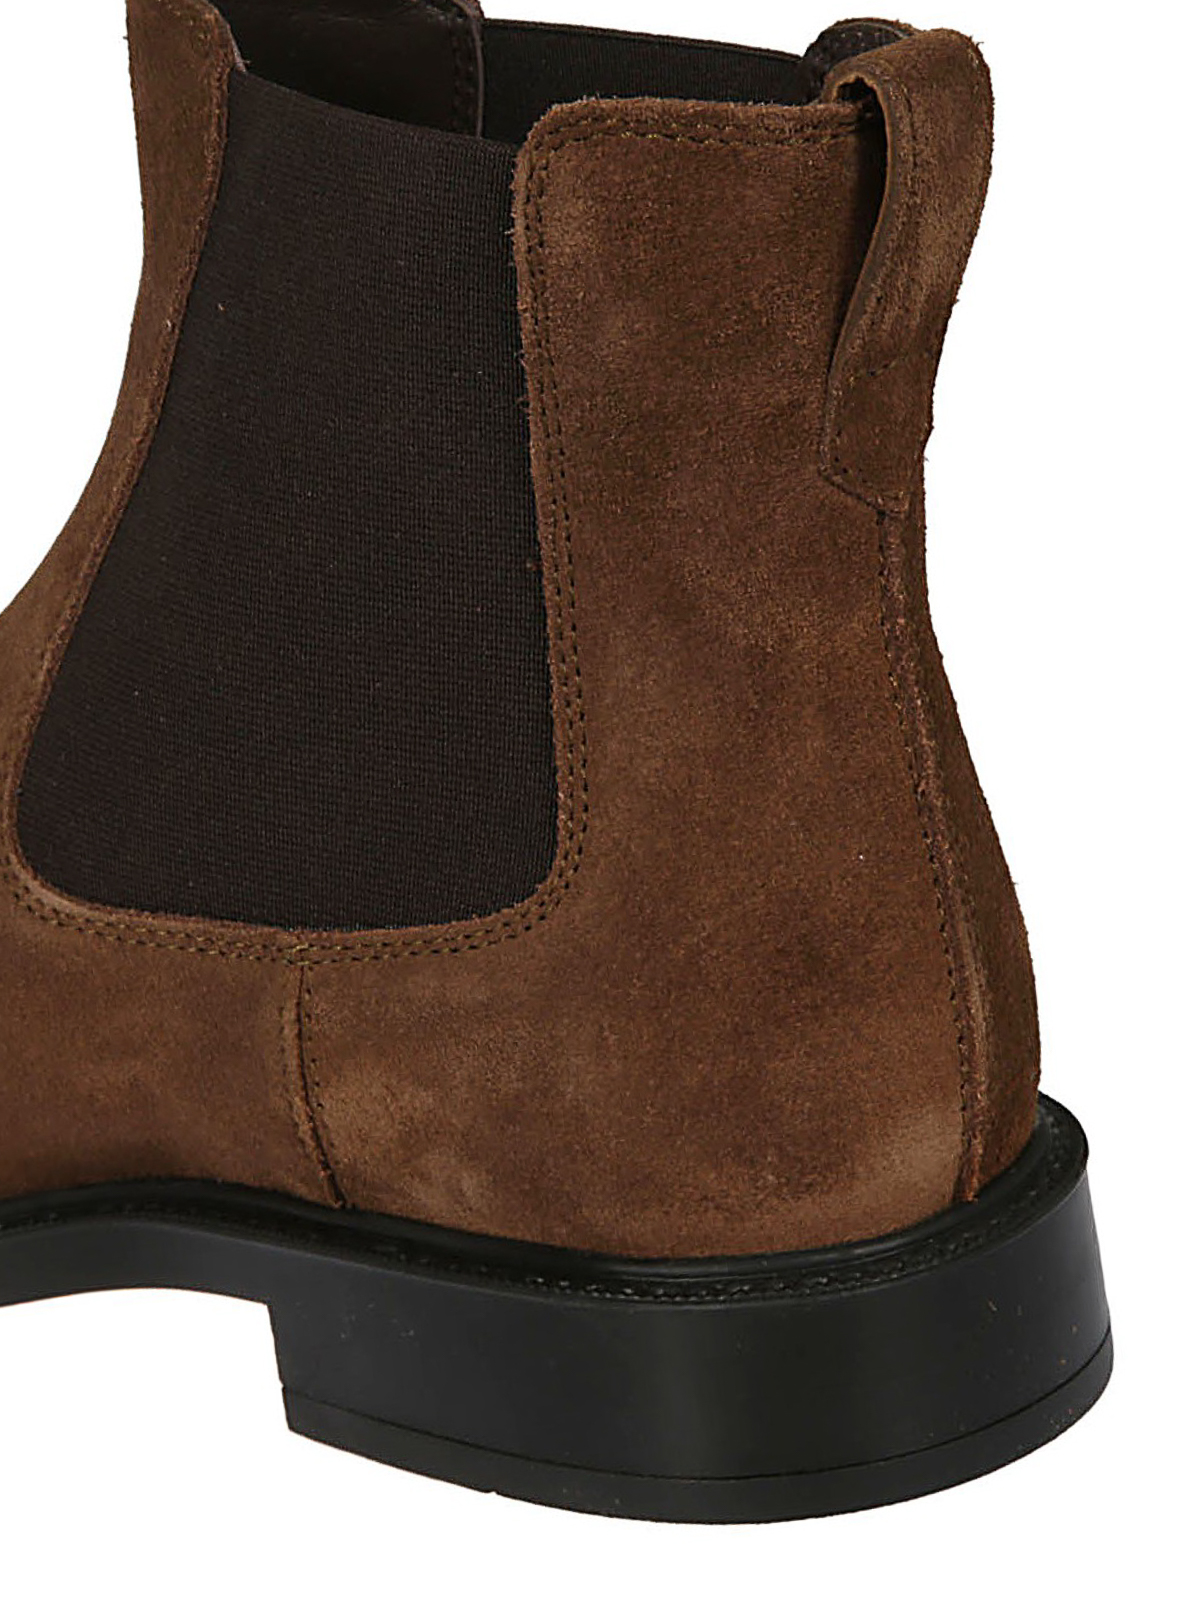 ankle boots rubber sole